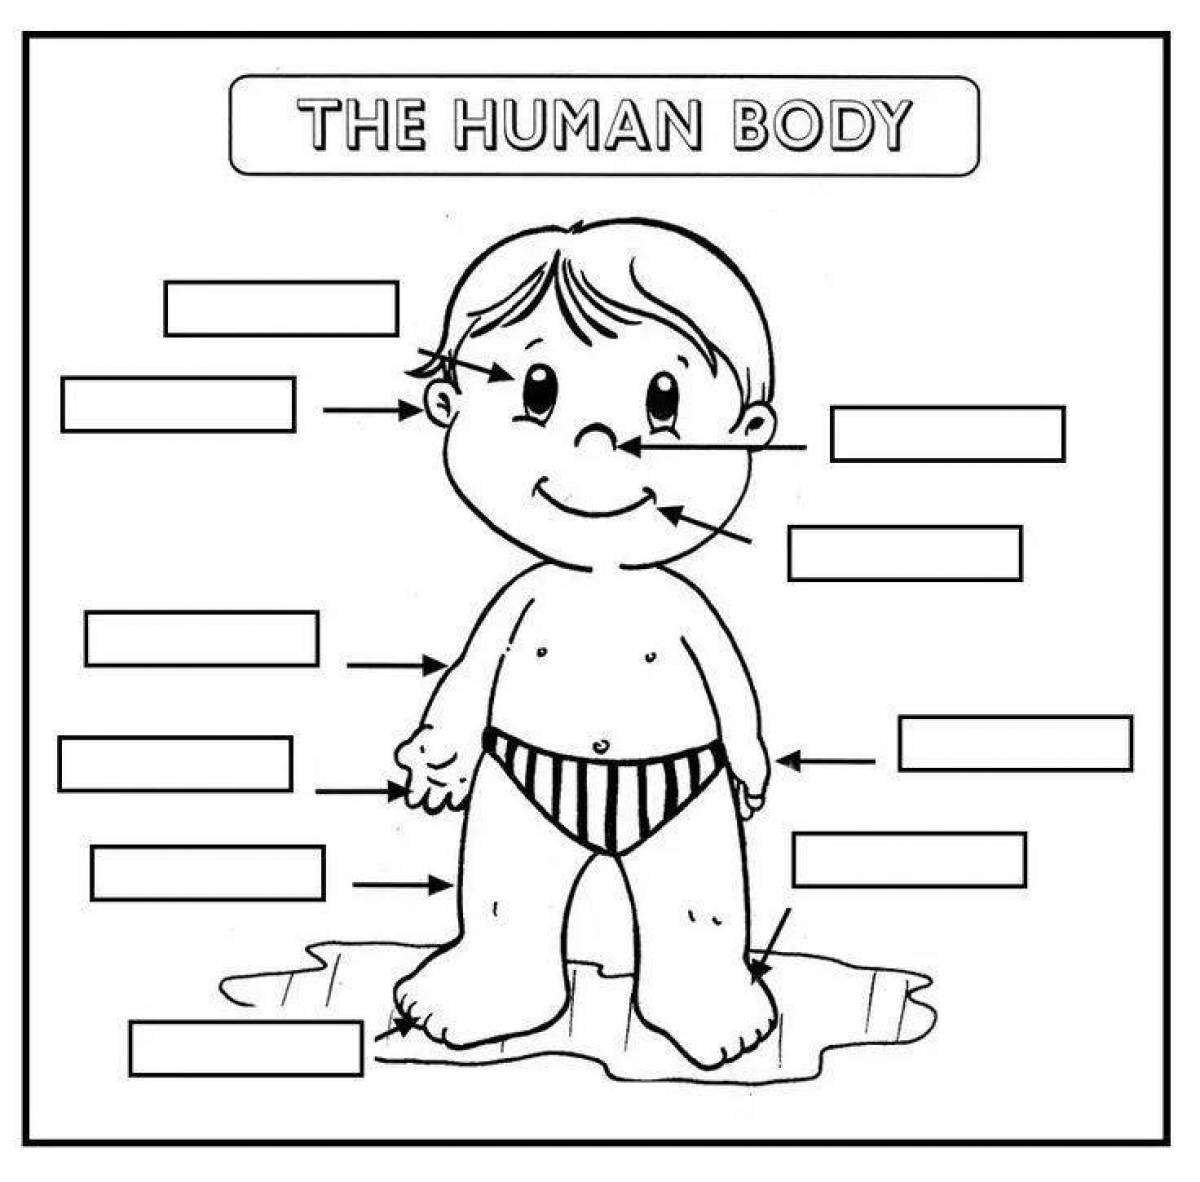 Colorful English body parts coloring page